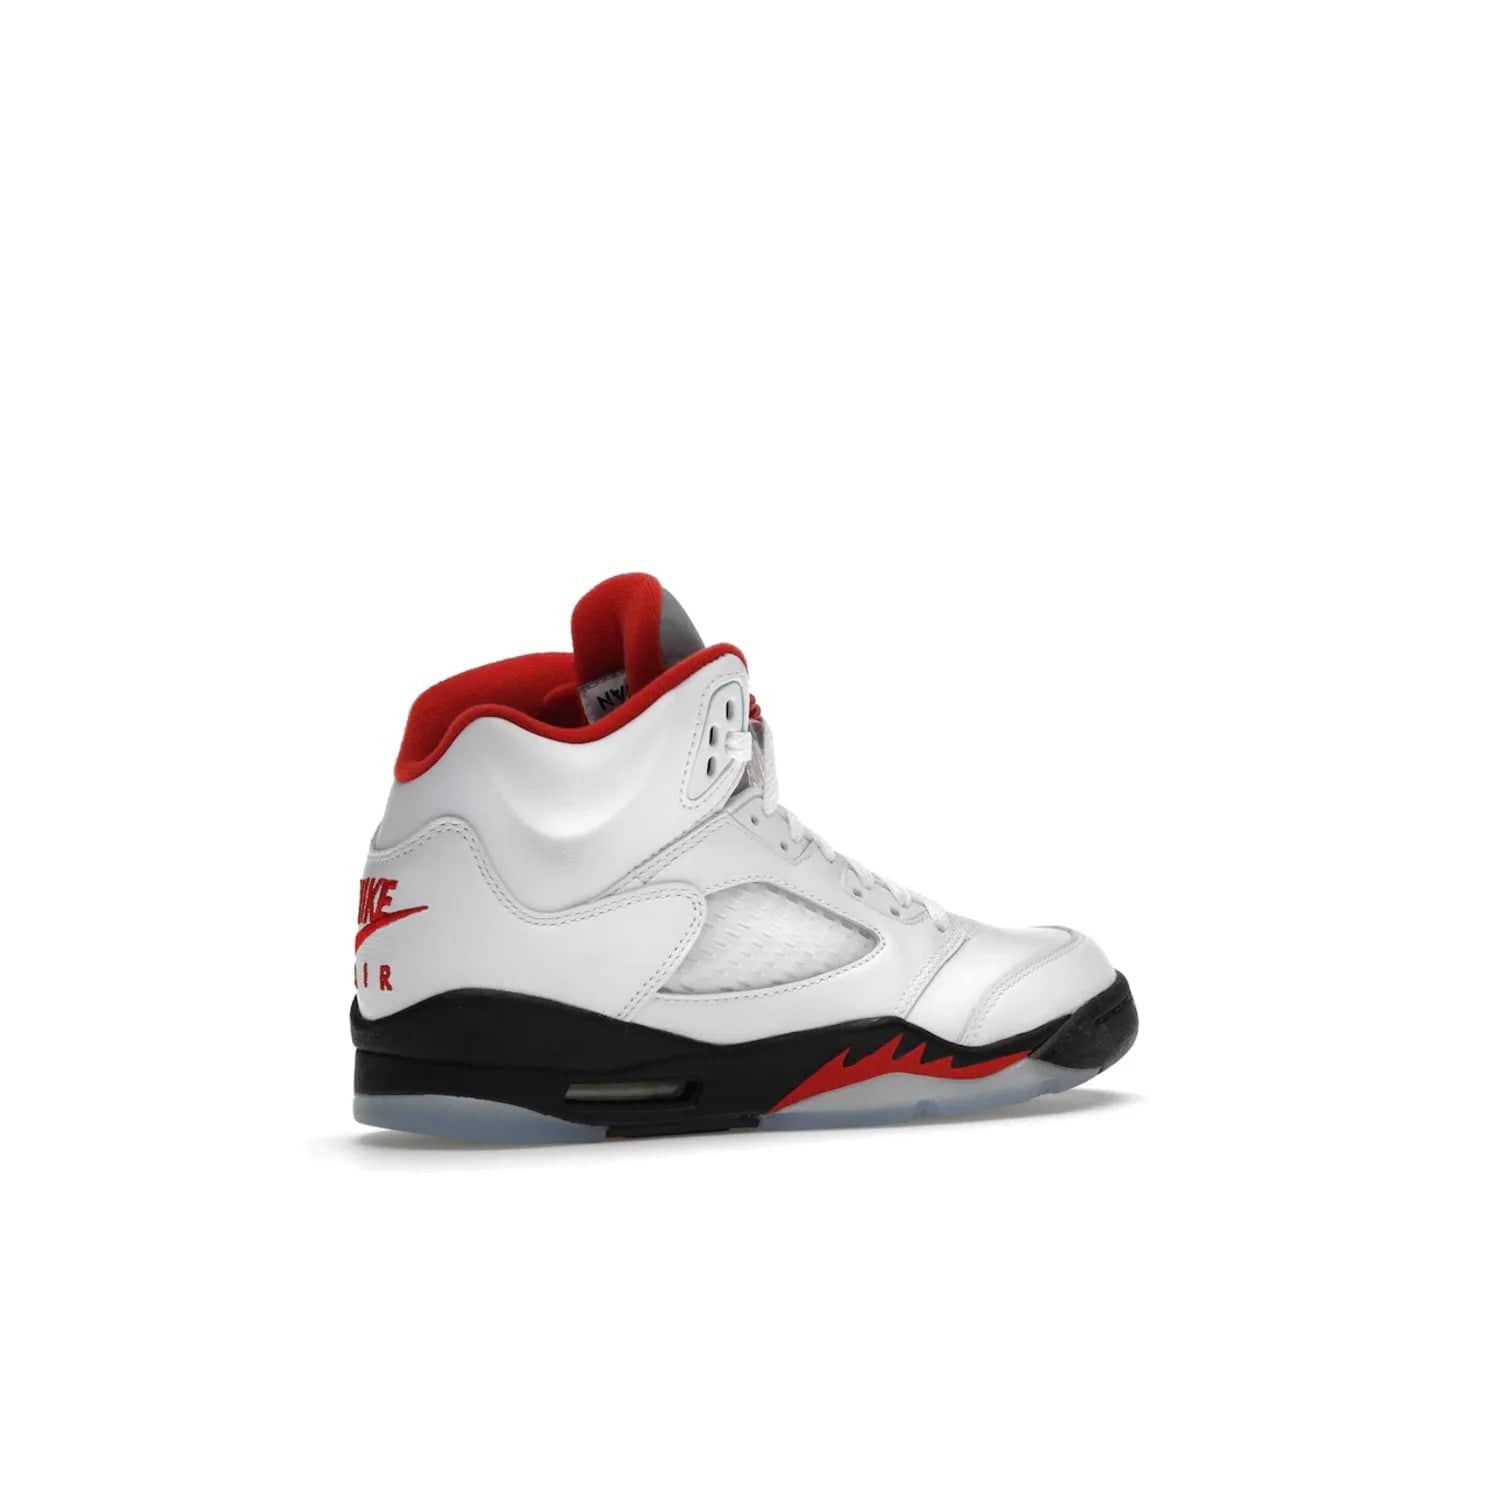 Jordan 5 Retro Fire Red Silver Tongue (2020) (GS) - Image 34 - Only at www.BallersClubKickz.com - A stylish option for any grade schooler. The Air Jordan 5 Retro Fire Red Silver Tongue 2020 GS features a combination of four hues, premium white leather, a clear mesh mid-upper and a reflective silver tongue. An icy translucent blue outsole completes the look. Available on May 2, $150.